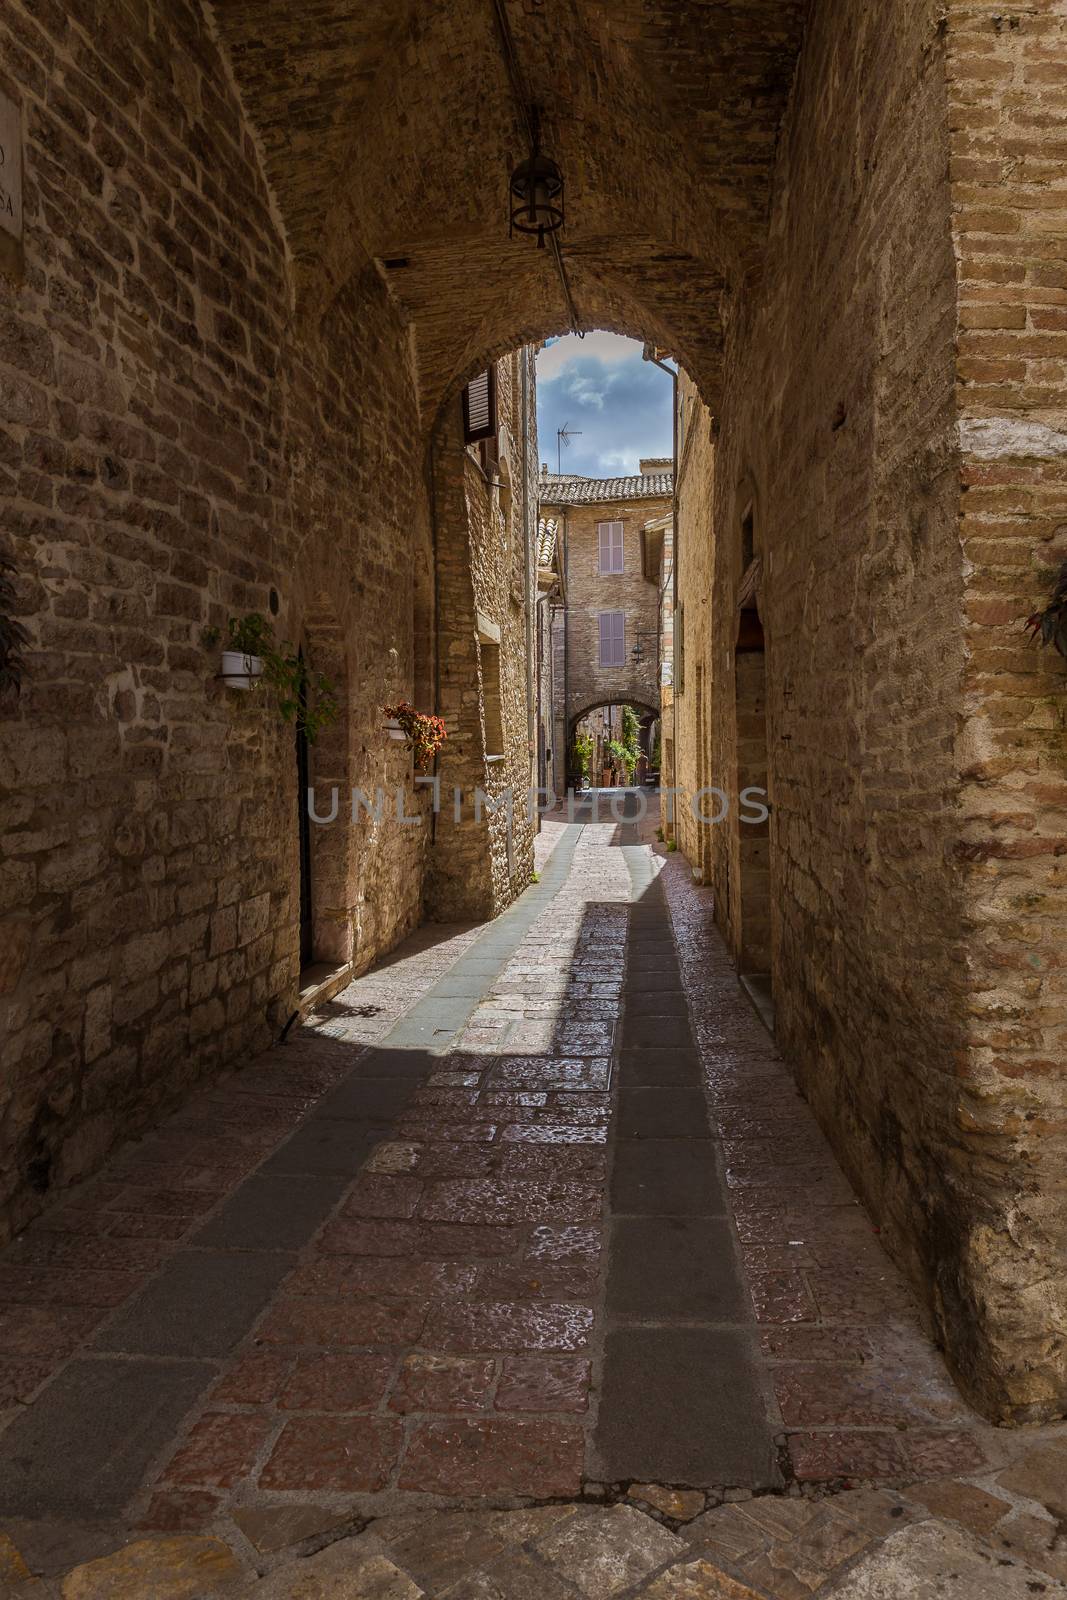 Streets and alleys in the wonderful town of Foligno (Italy)